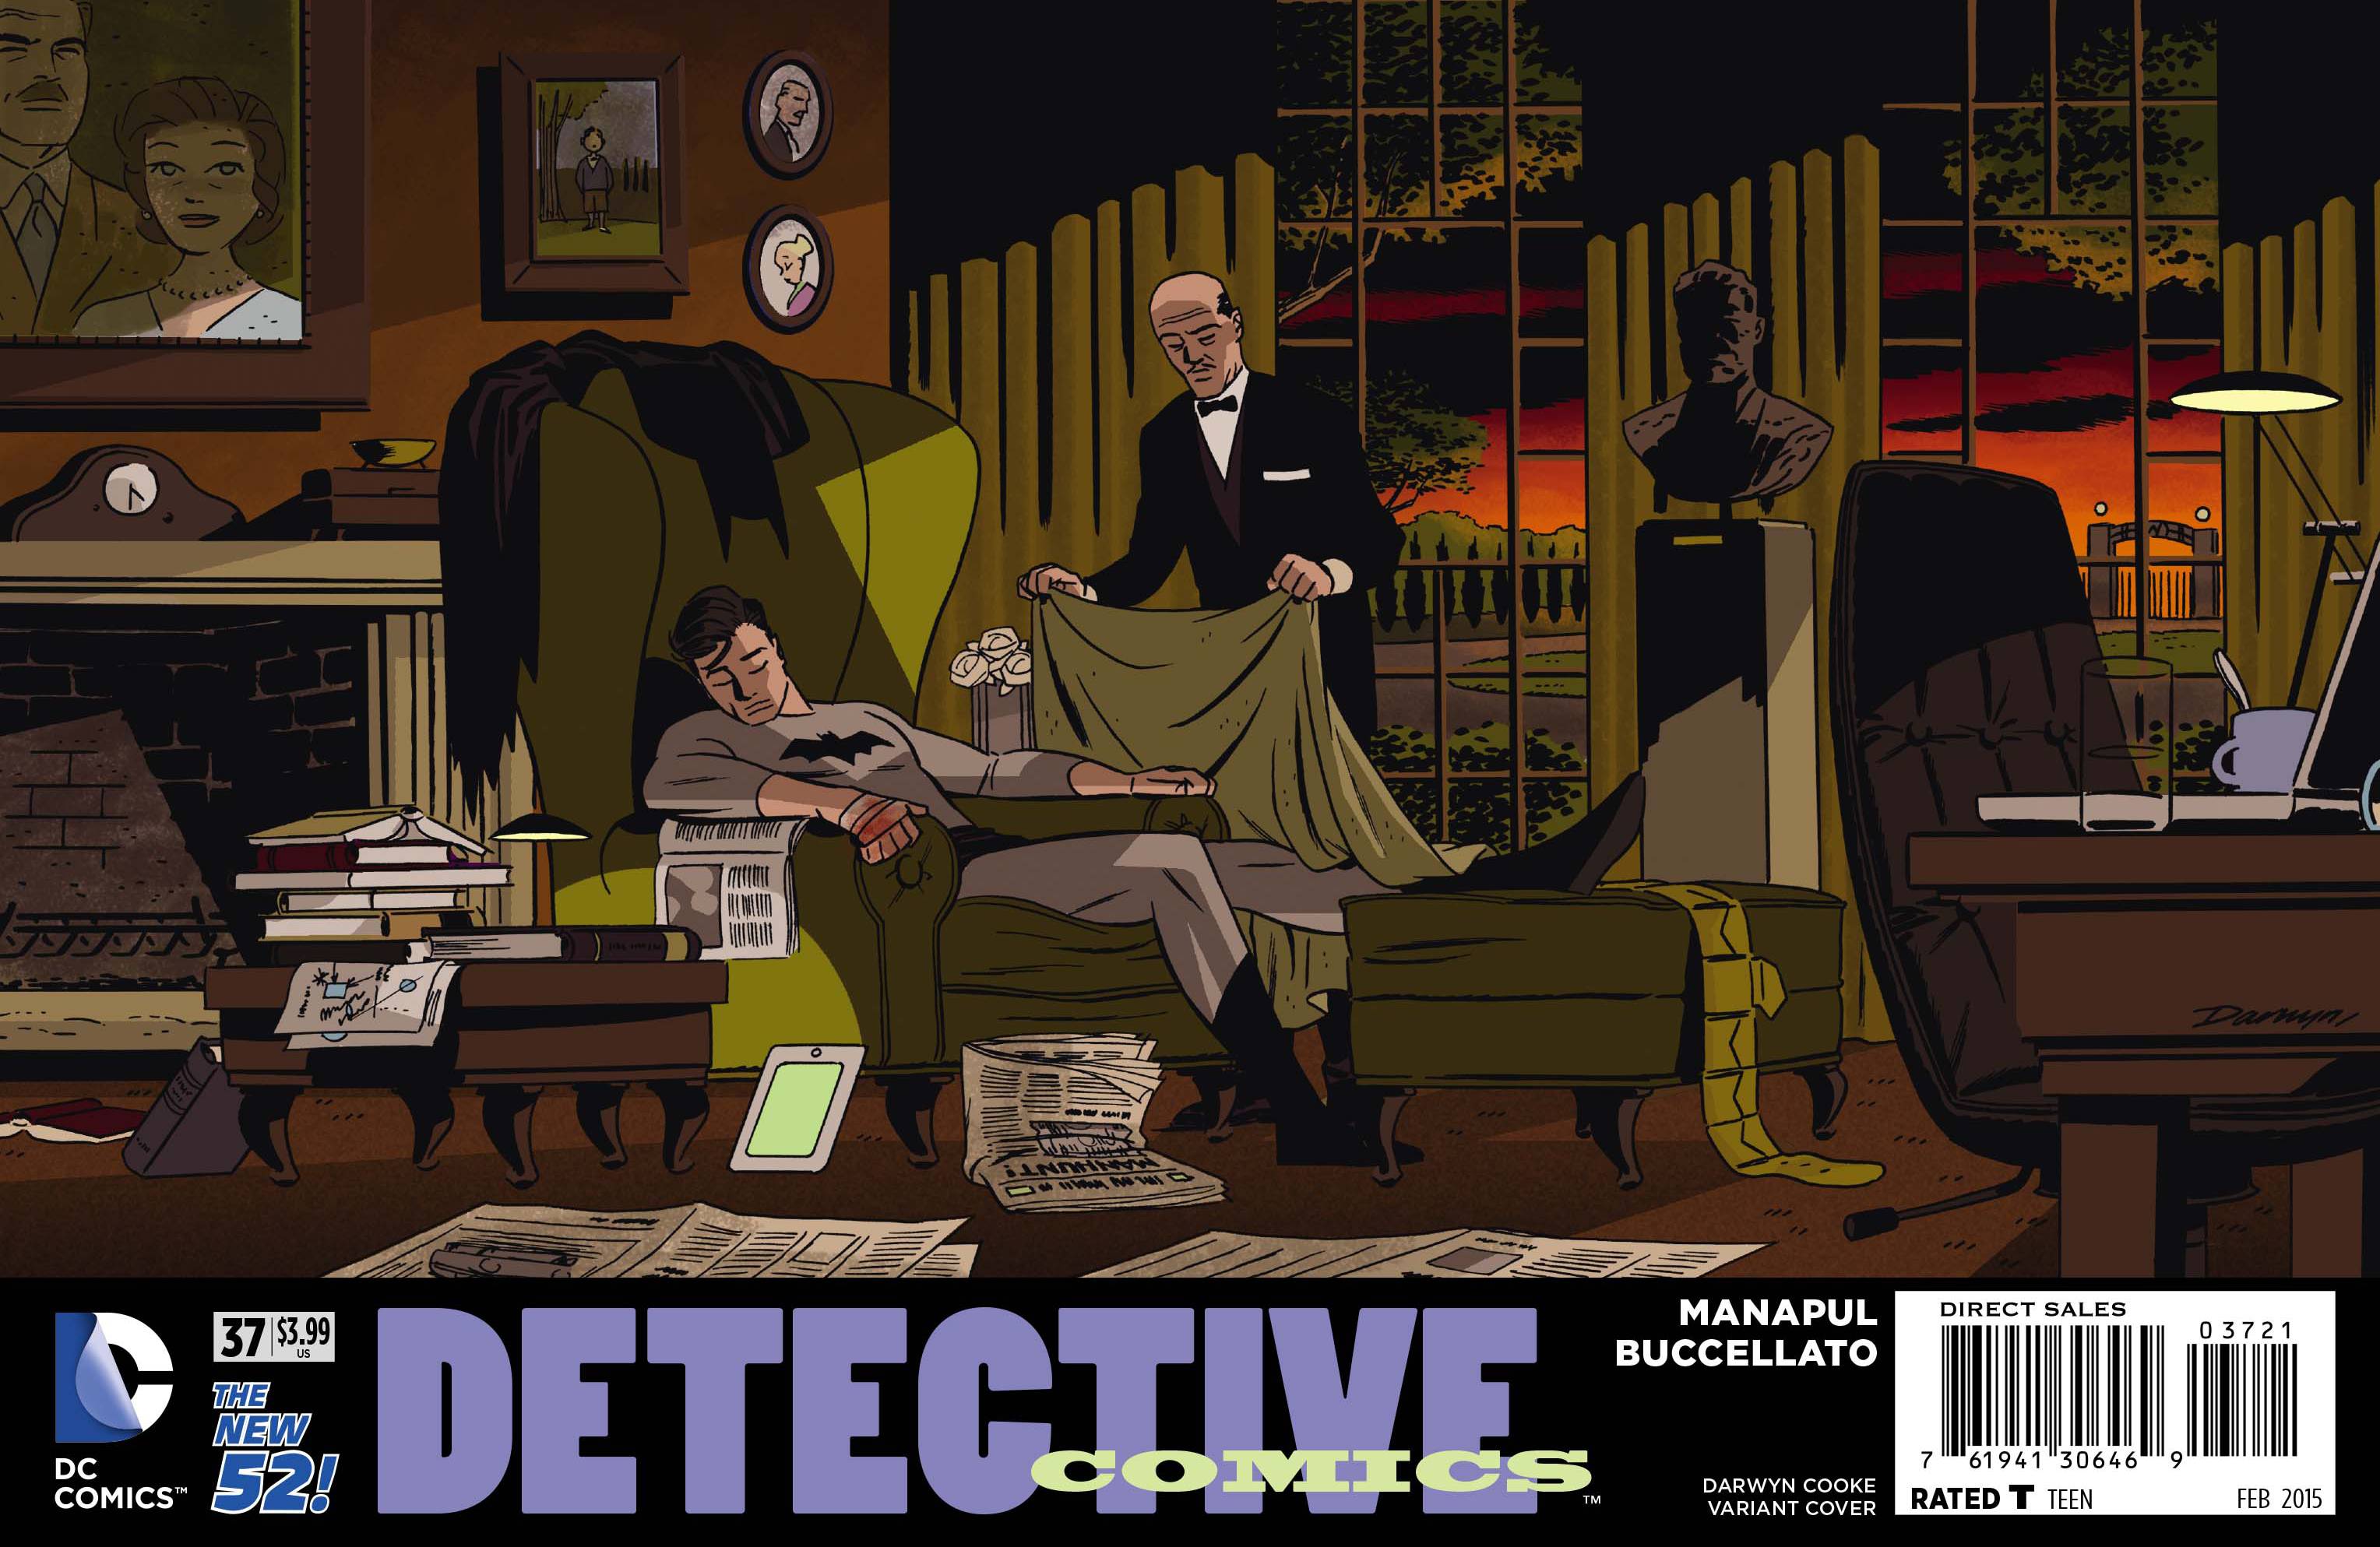 Detective Comics #32 Promotion by Darwyn Cooke